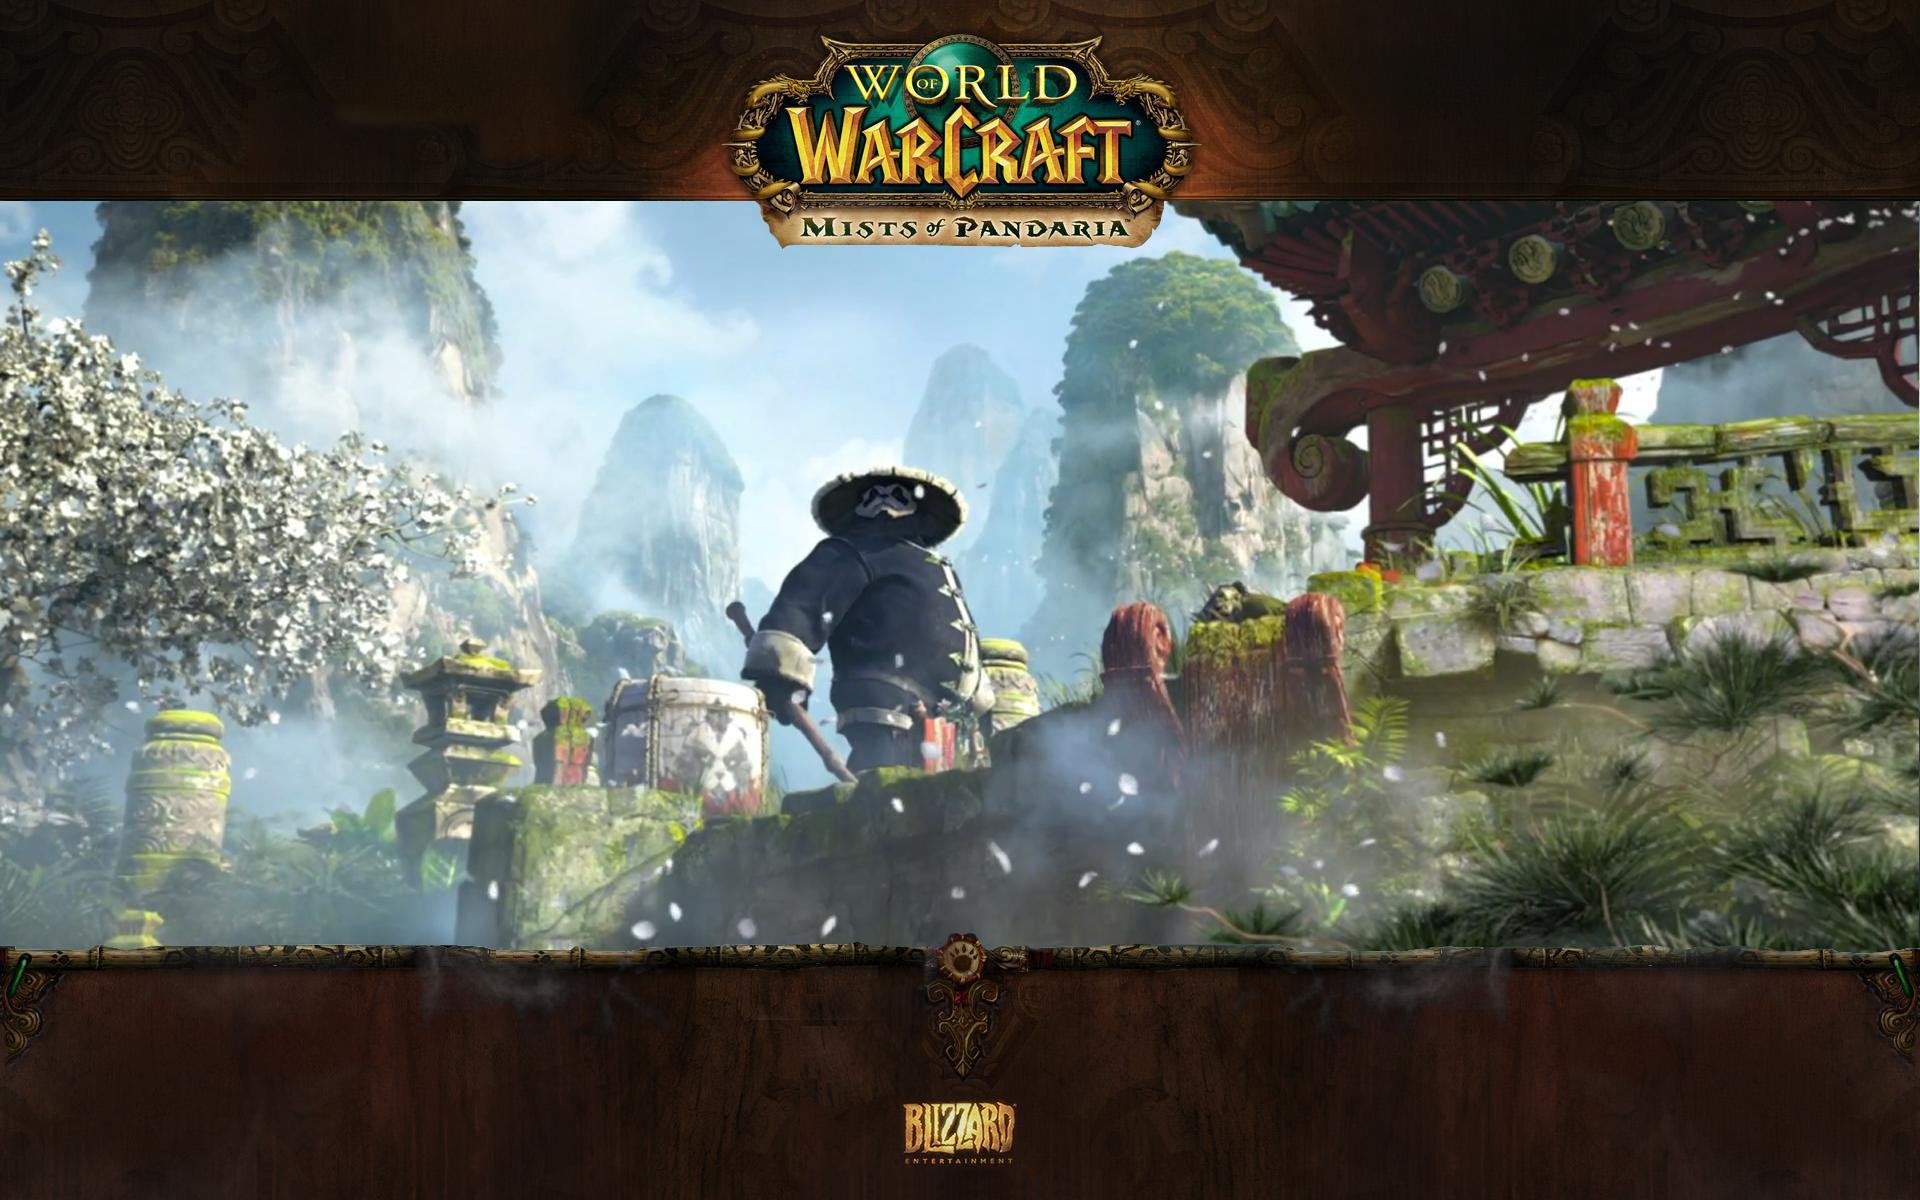 World Of Warcraft: Mists Of Pandaria Backgrounds, Compatible - PC, Mobile, Gadgets| 1920x1200 px